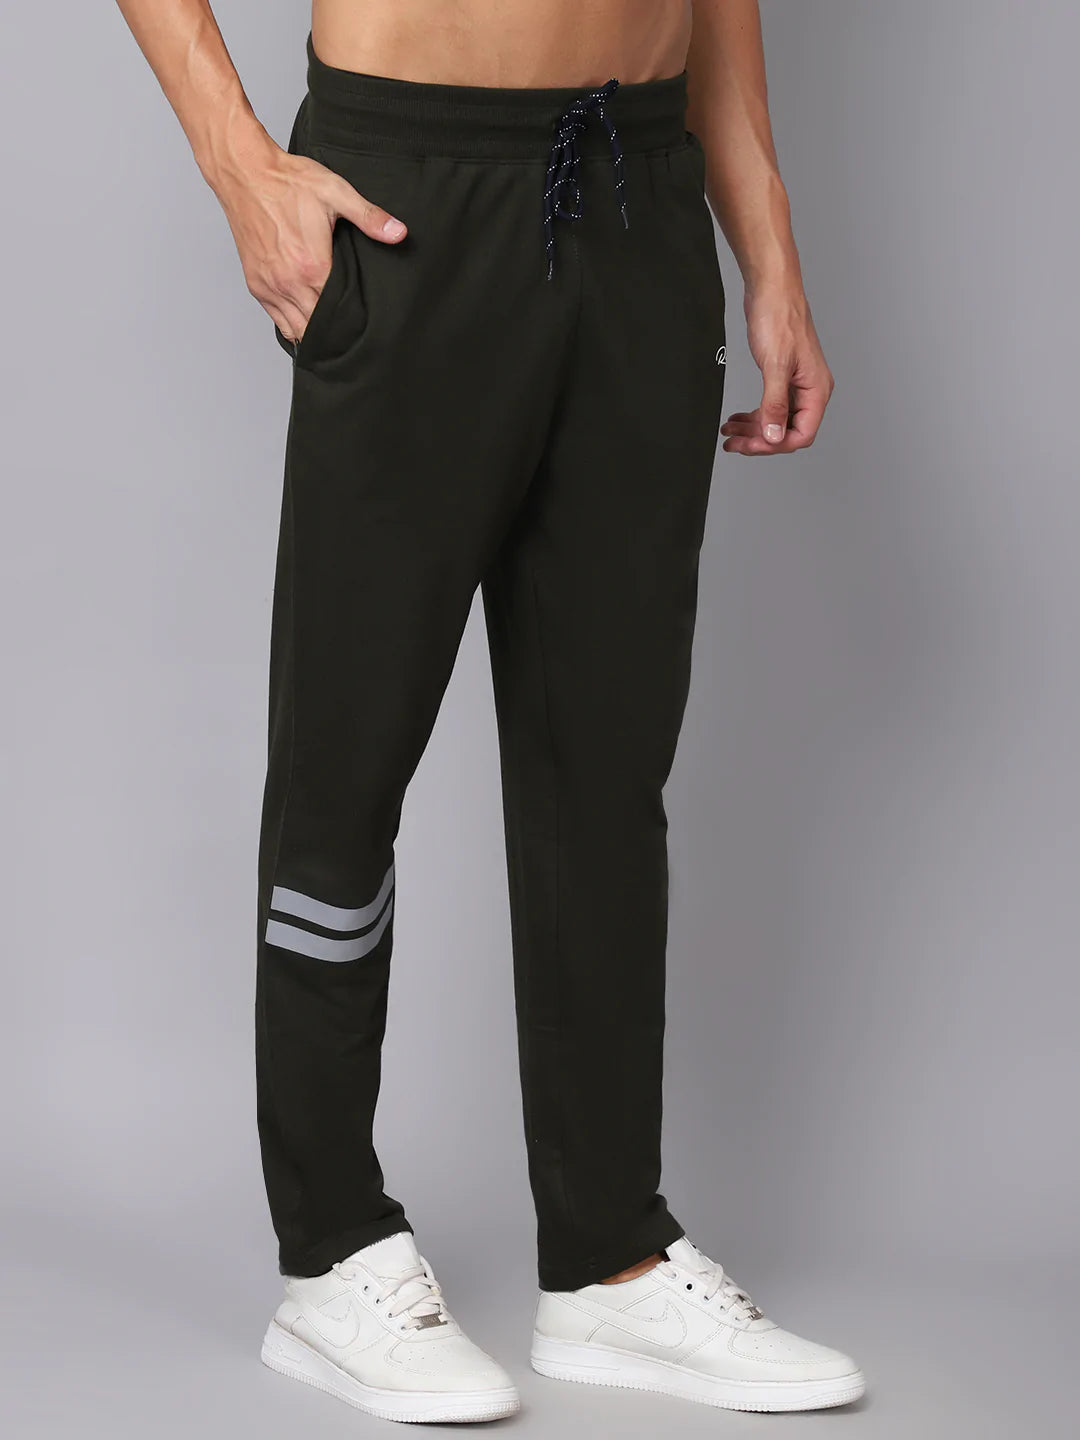 Dazz Branded Men Lower, Track Pants Rs 899 Only Black : Amazon.in: Clothing  & Accessories